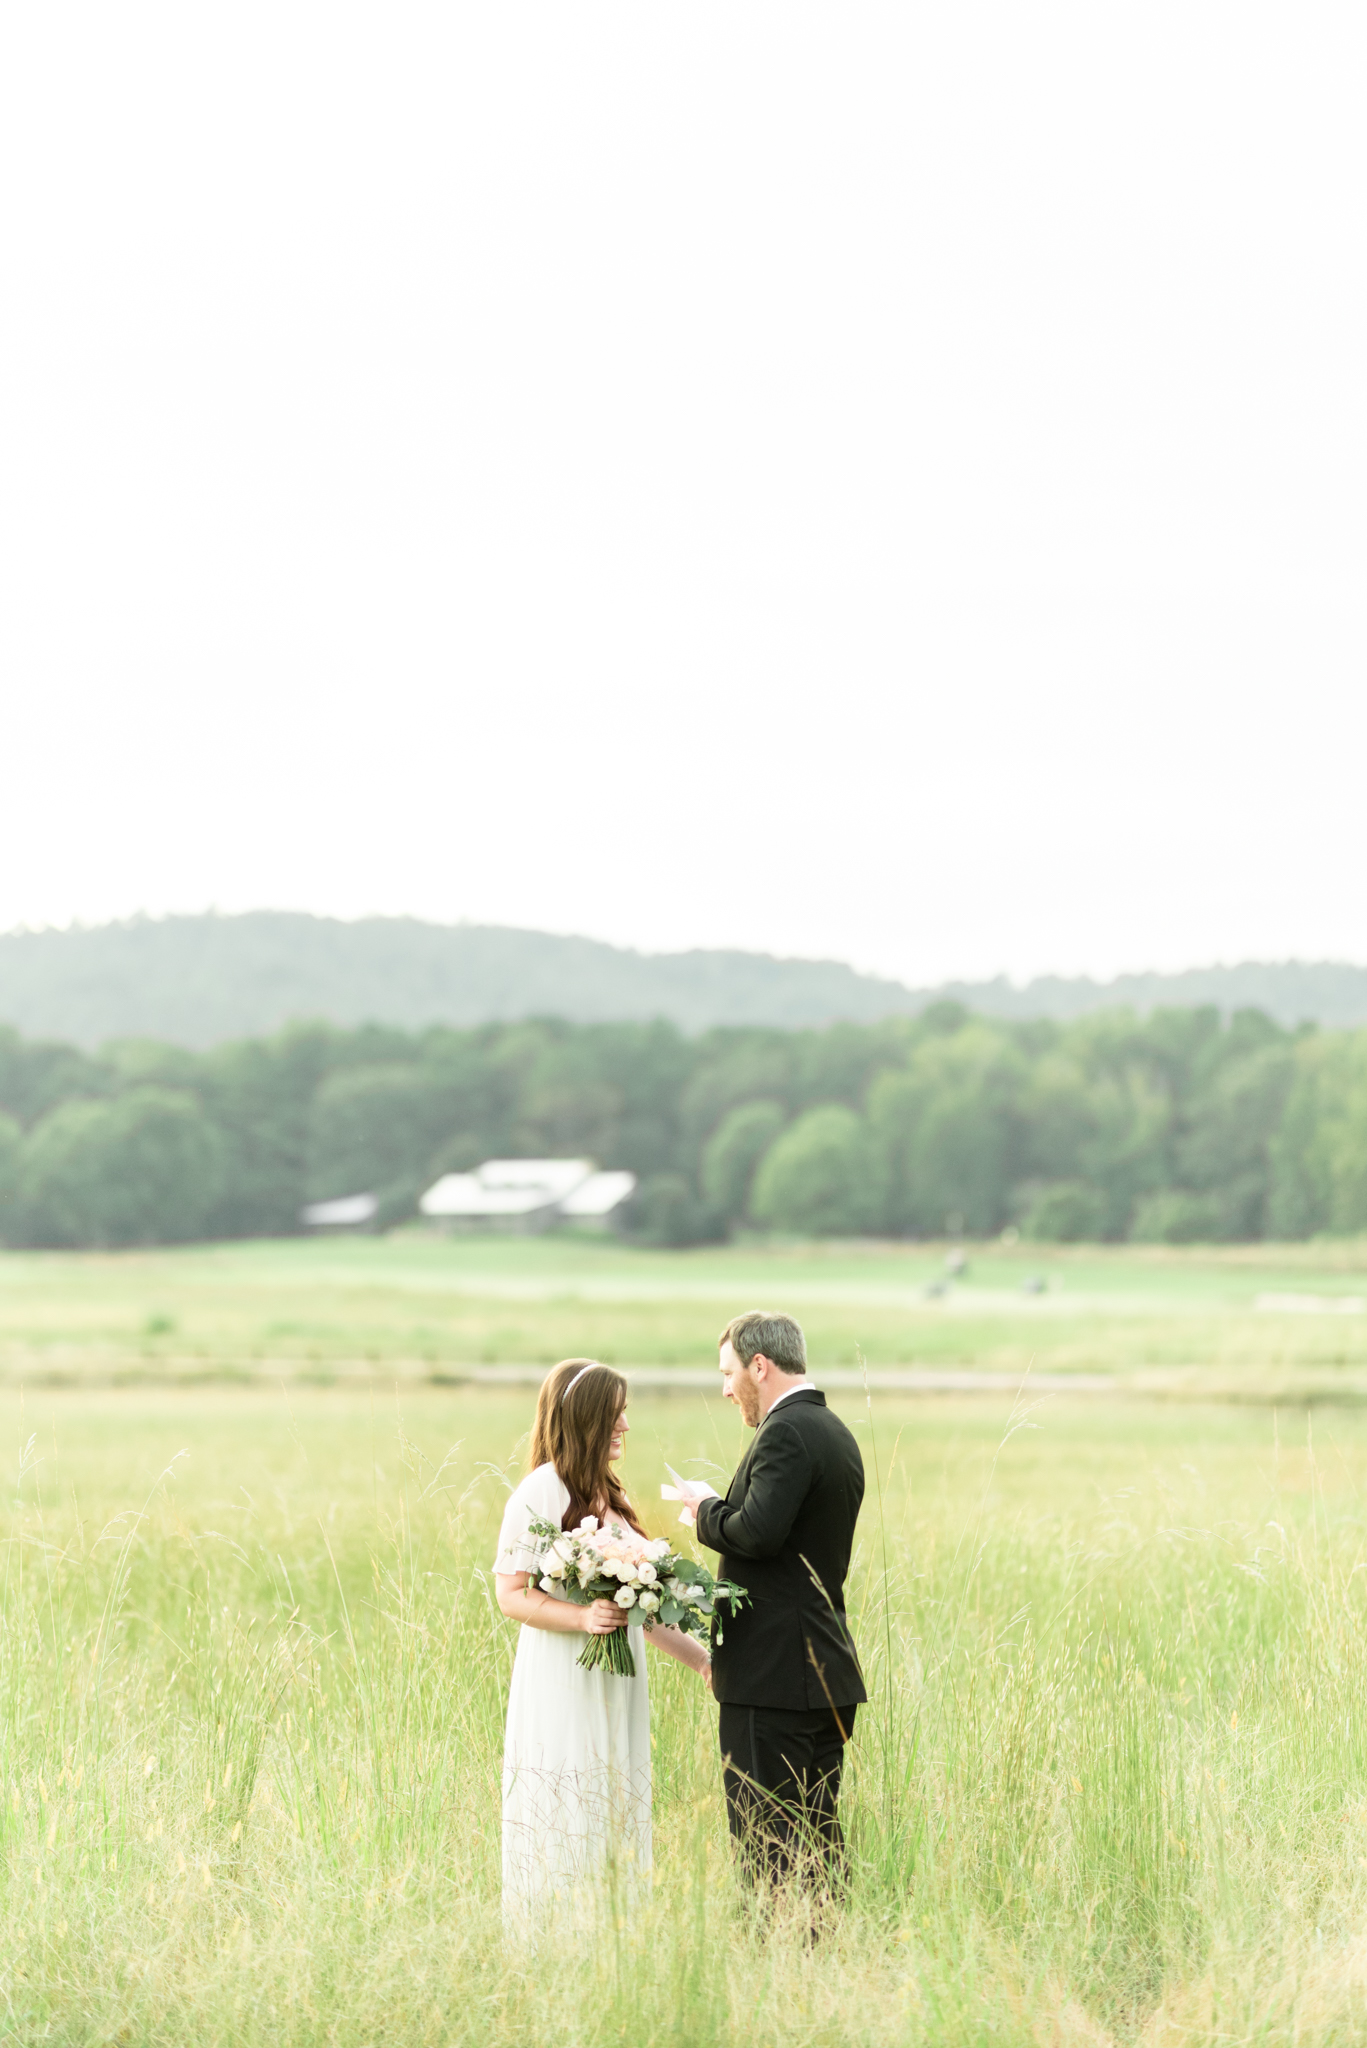 Bride and groom read vows in field.